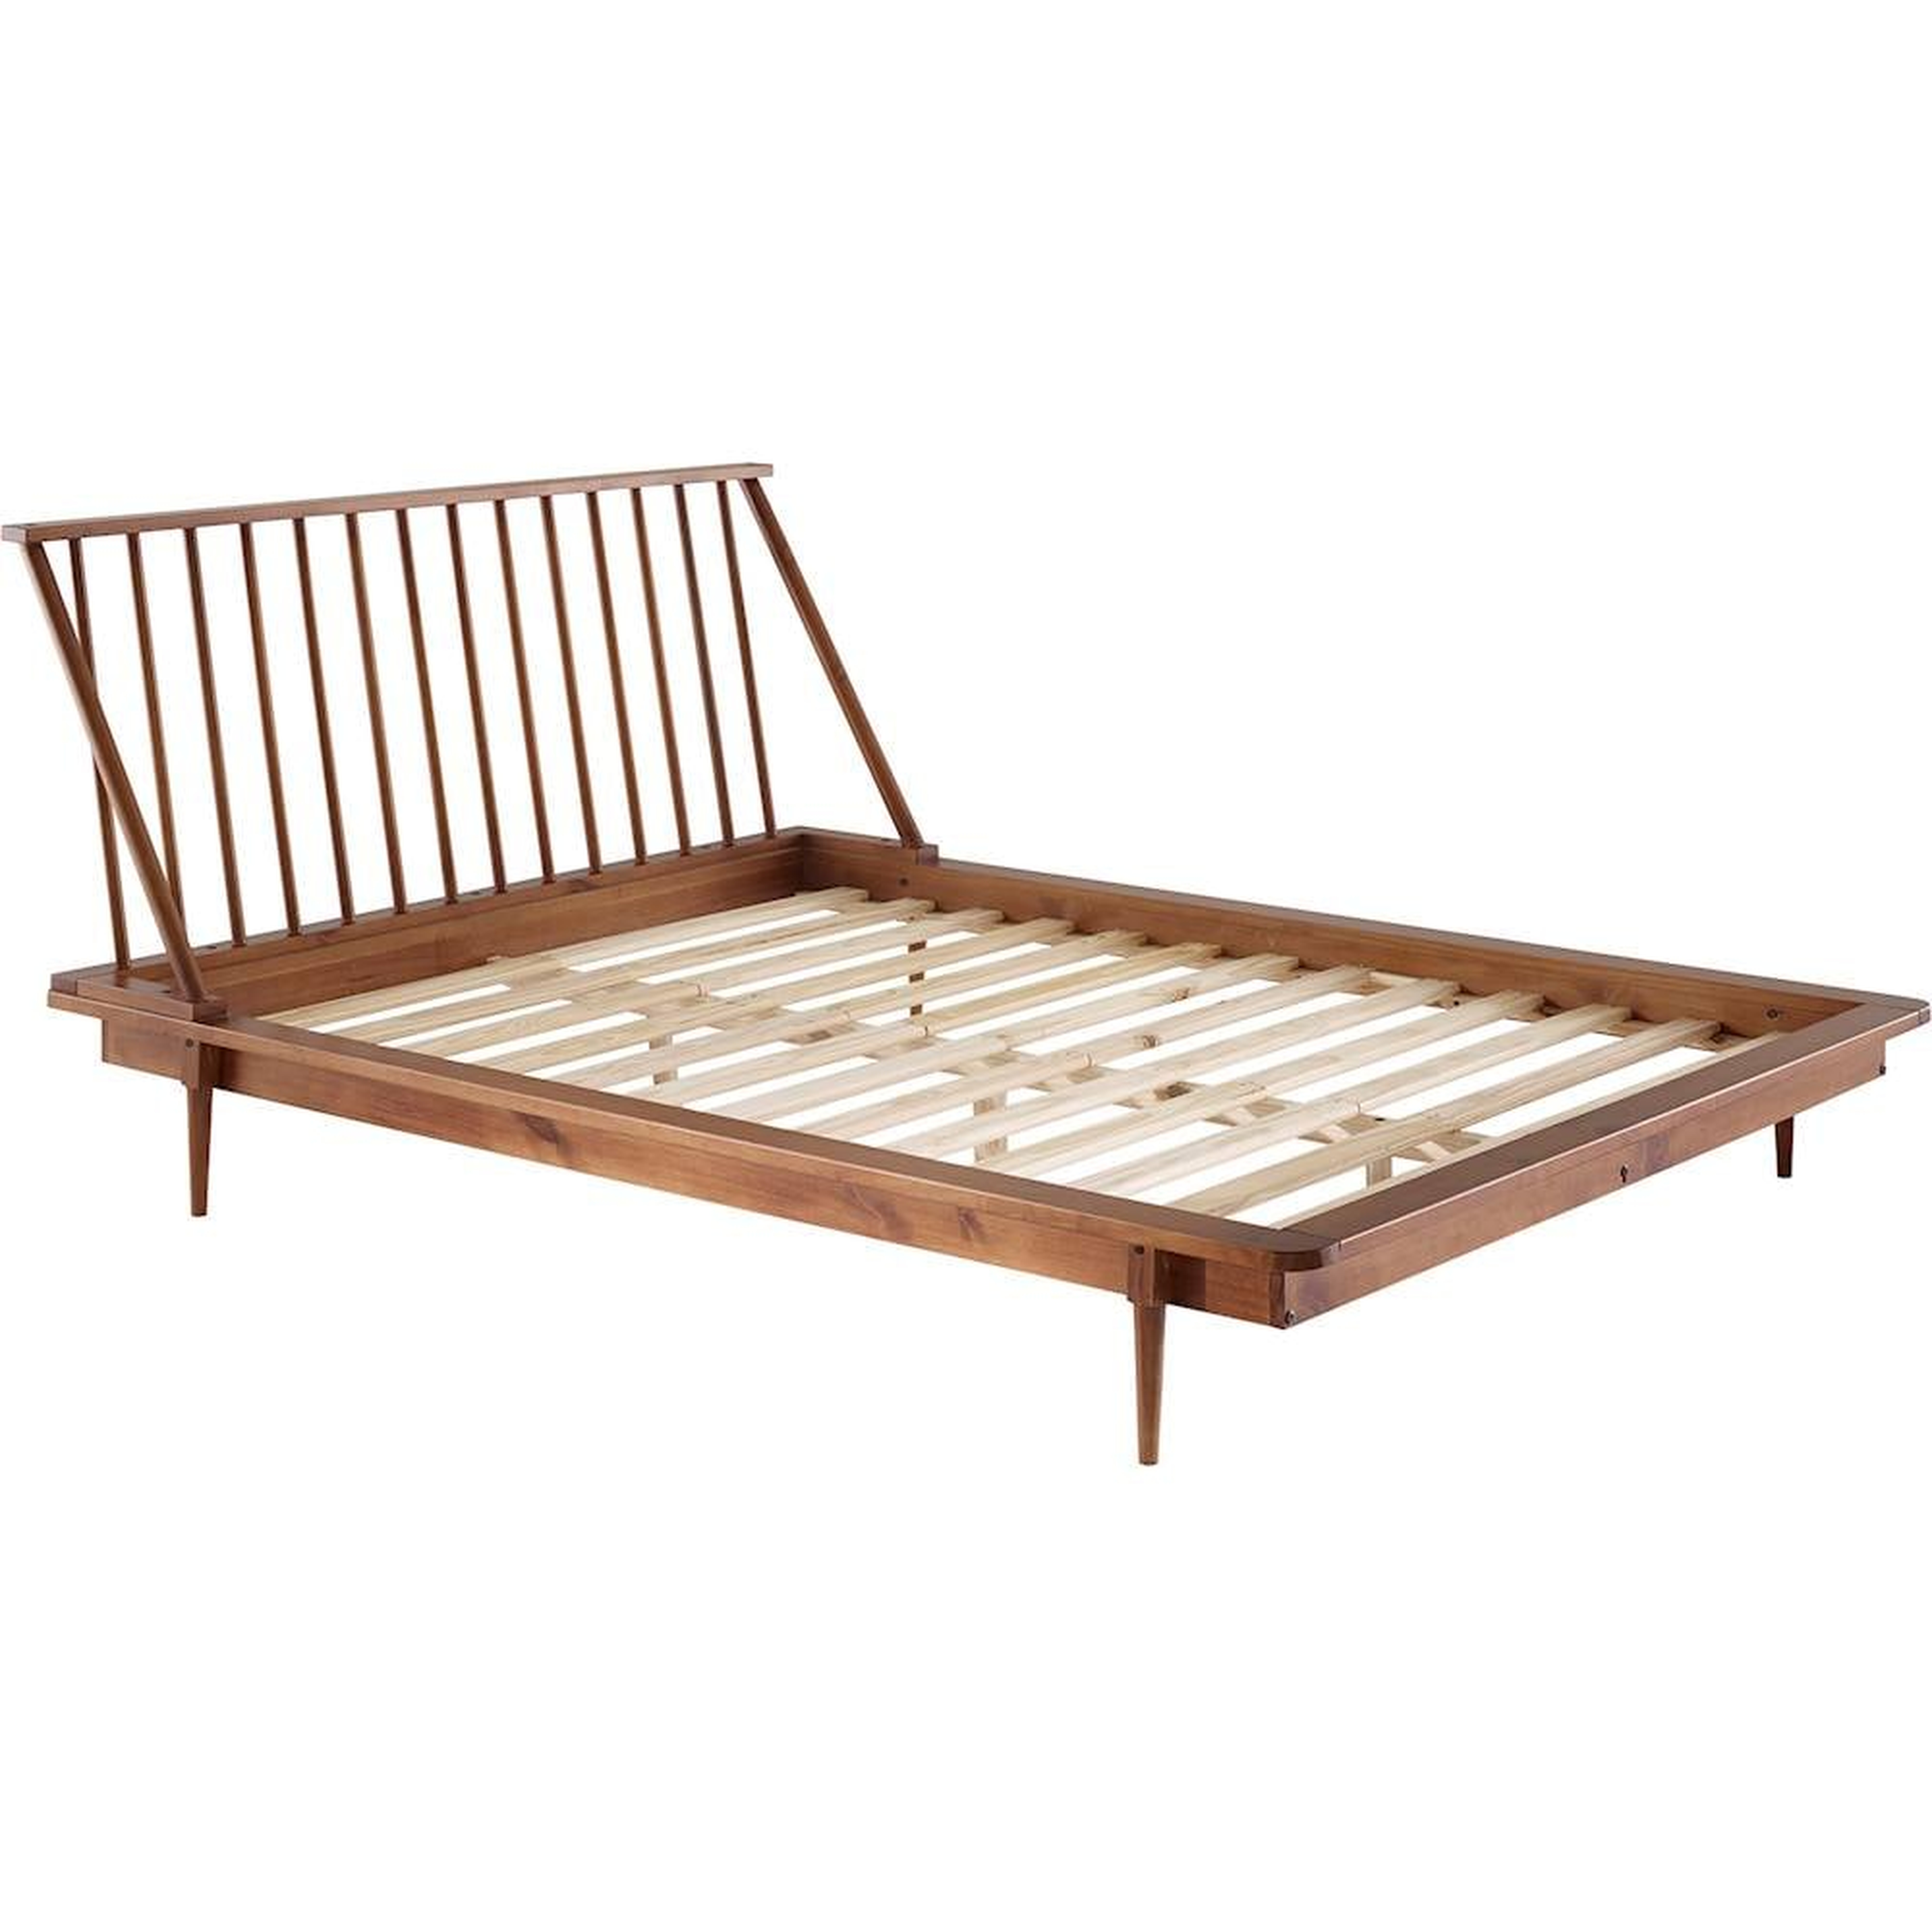 Spindle Back Solid Wood Queen Bed, Caramel - Cove Goods